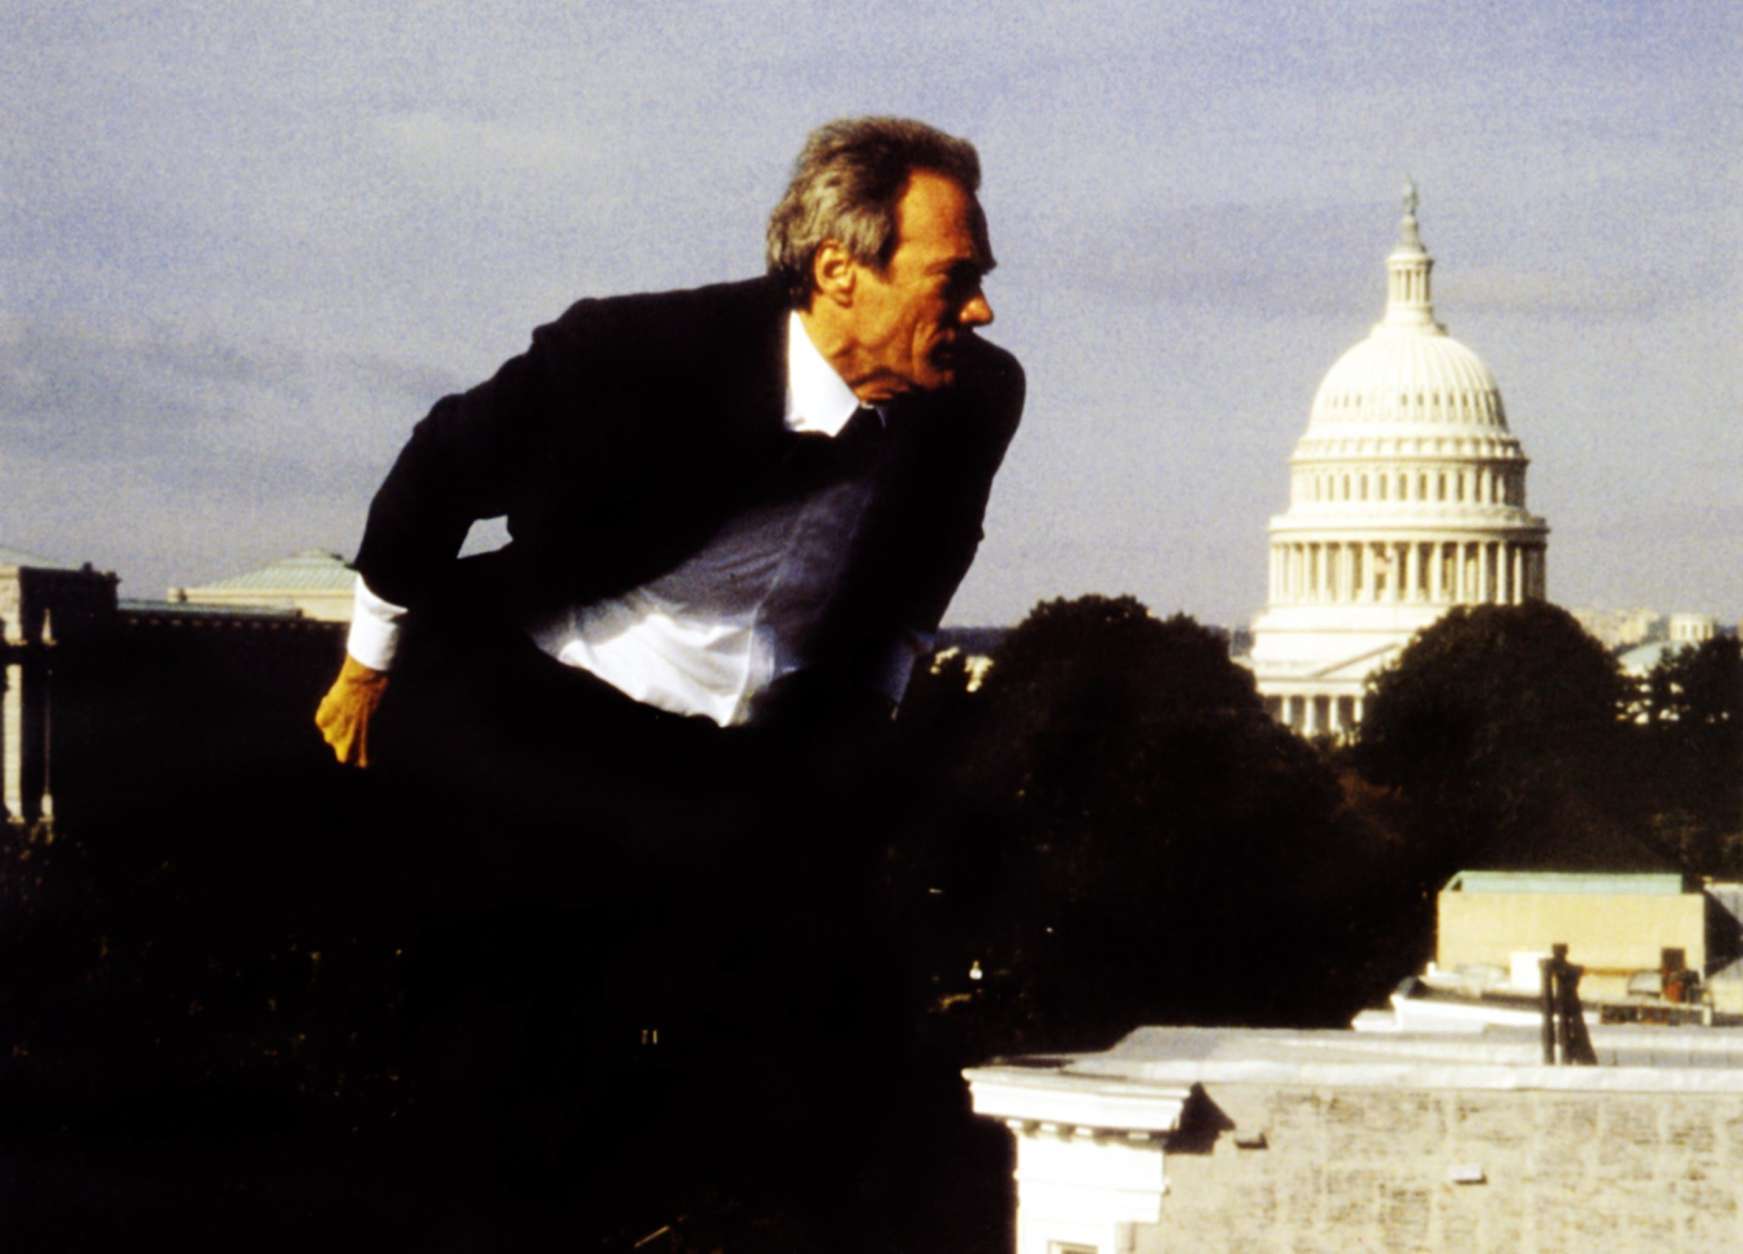 IN THE LINE OF FIRE, Clint Eastwood, 1993, ©Columbia Pictures/courtesy Everett Collection